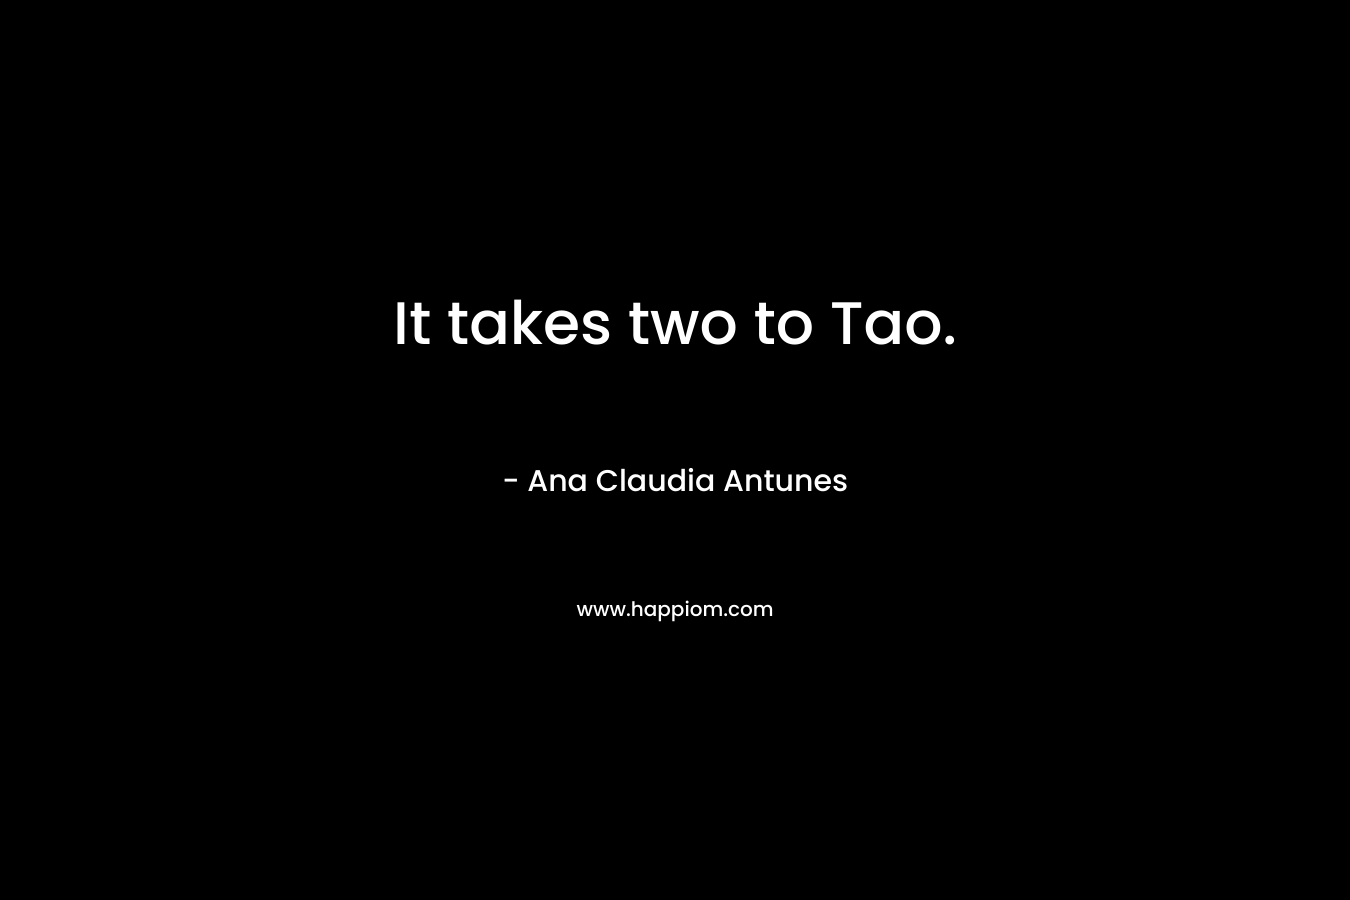 It takes two to Tao.